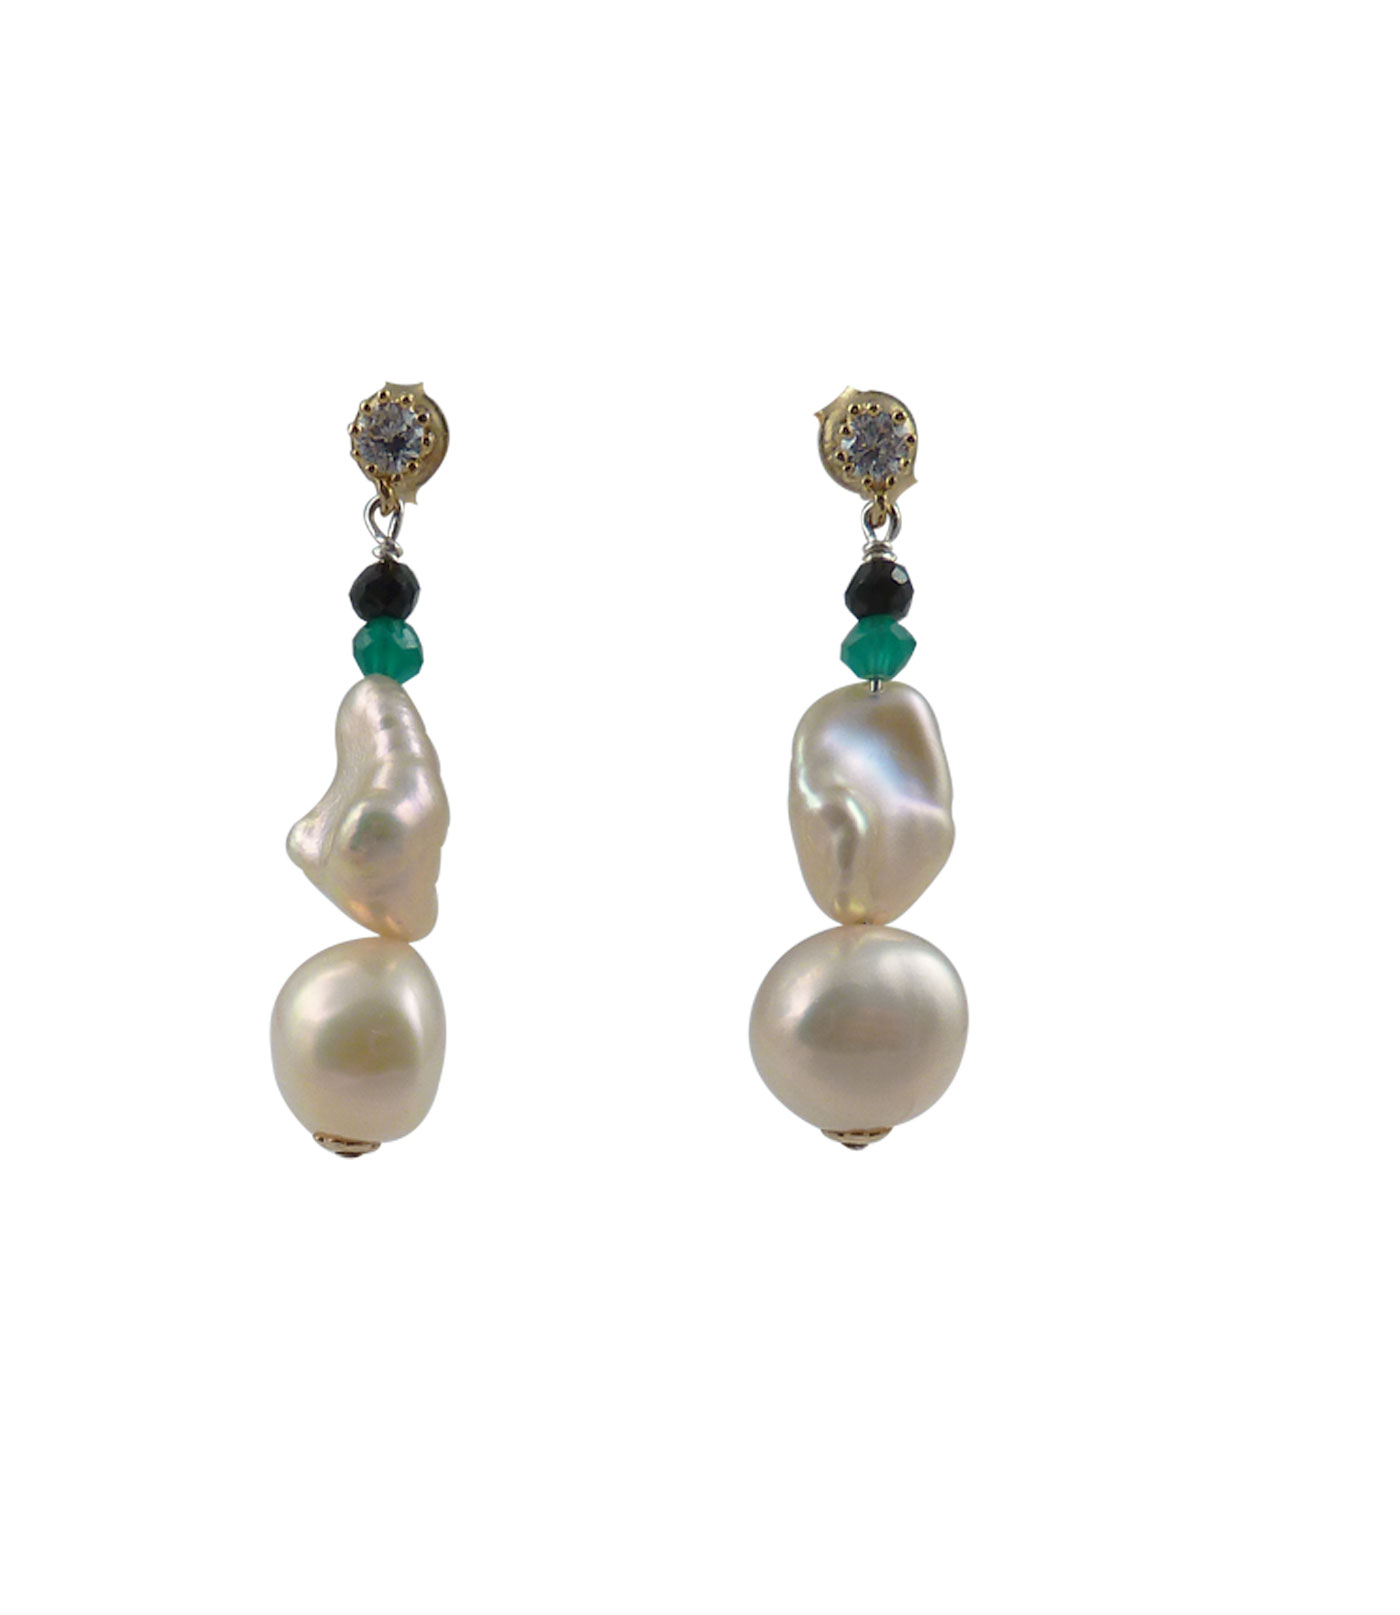 Keshi pink pearl earrings featuring amazing pearls and colored gems